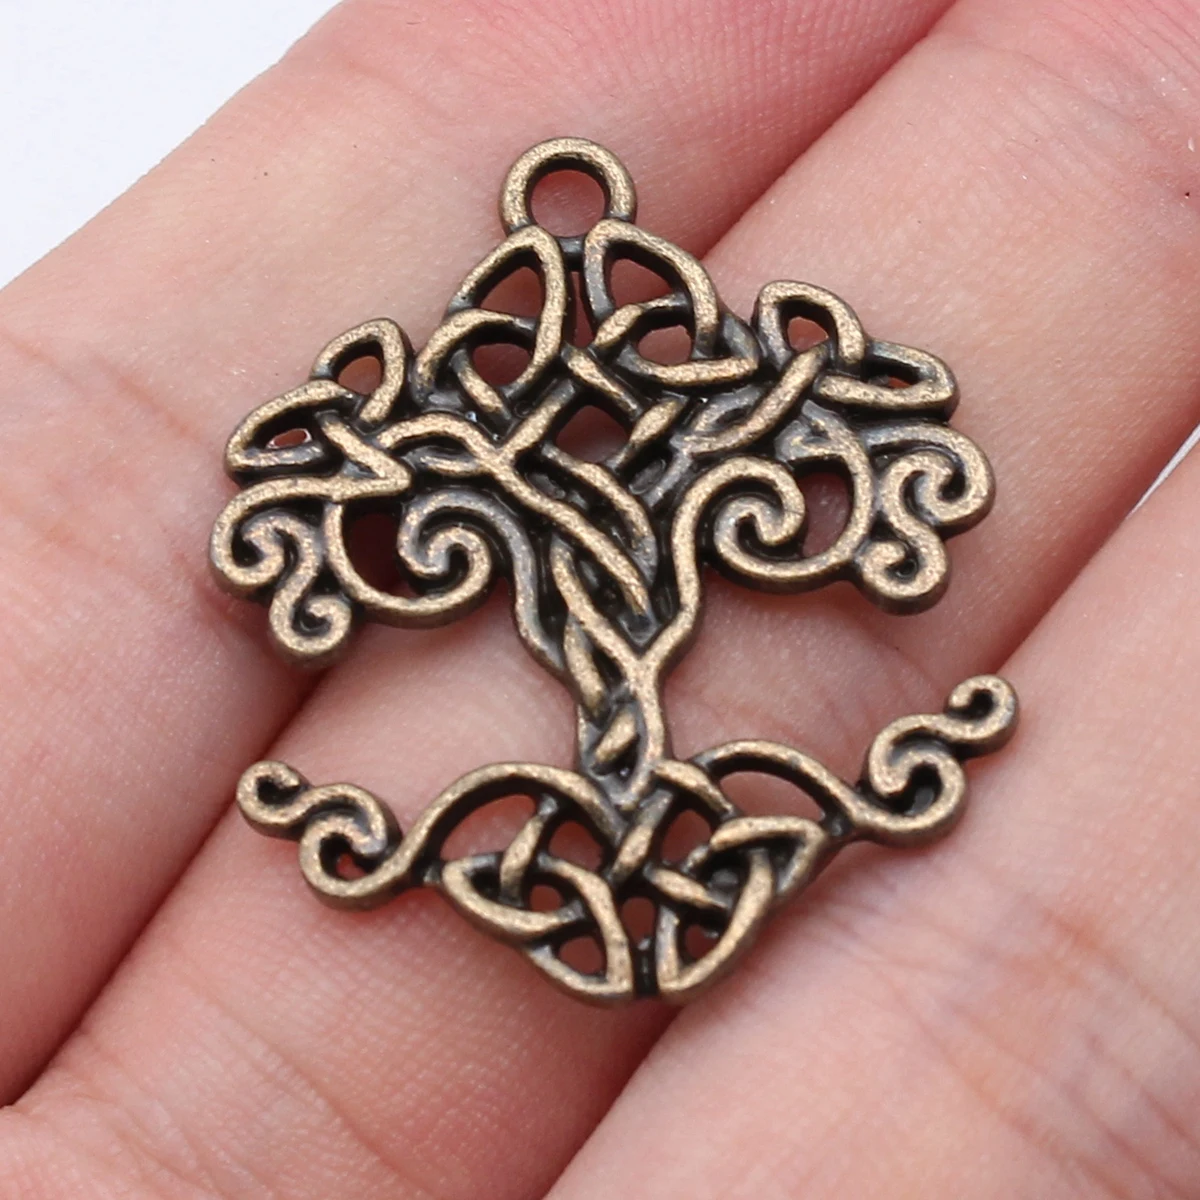 

Wholesale Keychain Triquetra Knot Amulet Tree Of Life Charms Jewelry Making Supplies 5pcs Antique Bronze Color